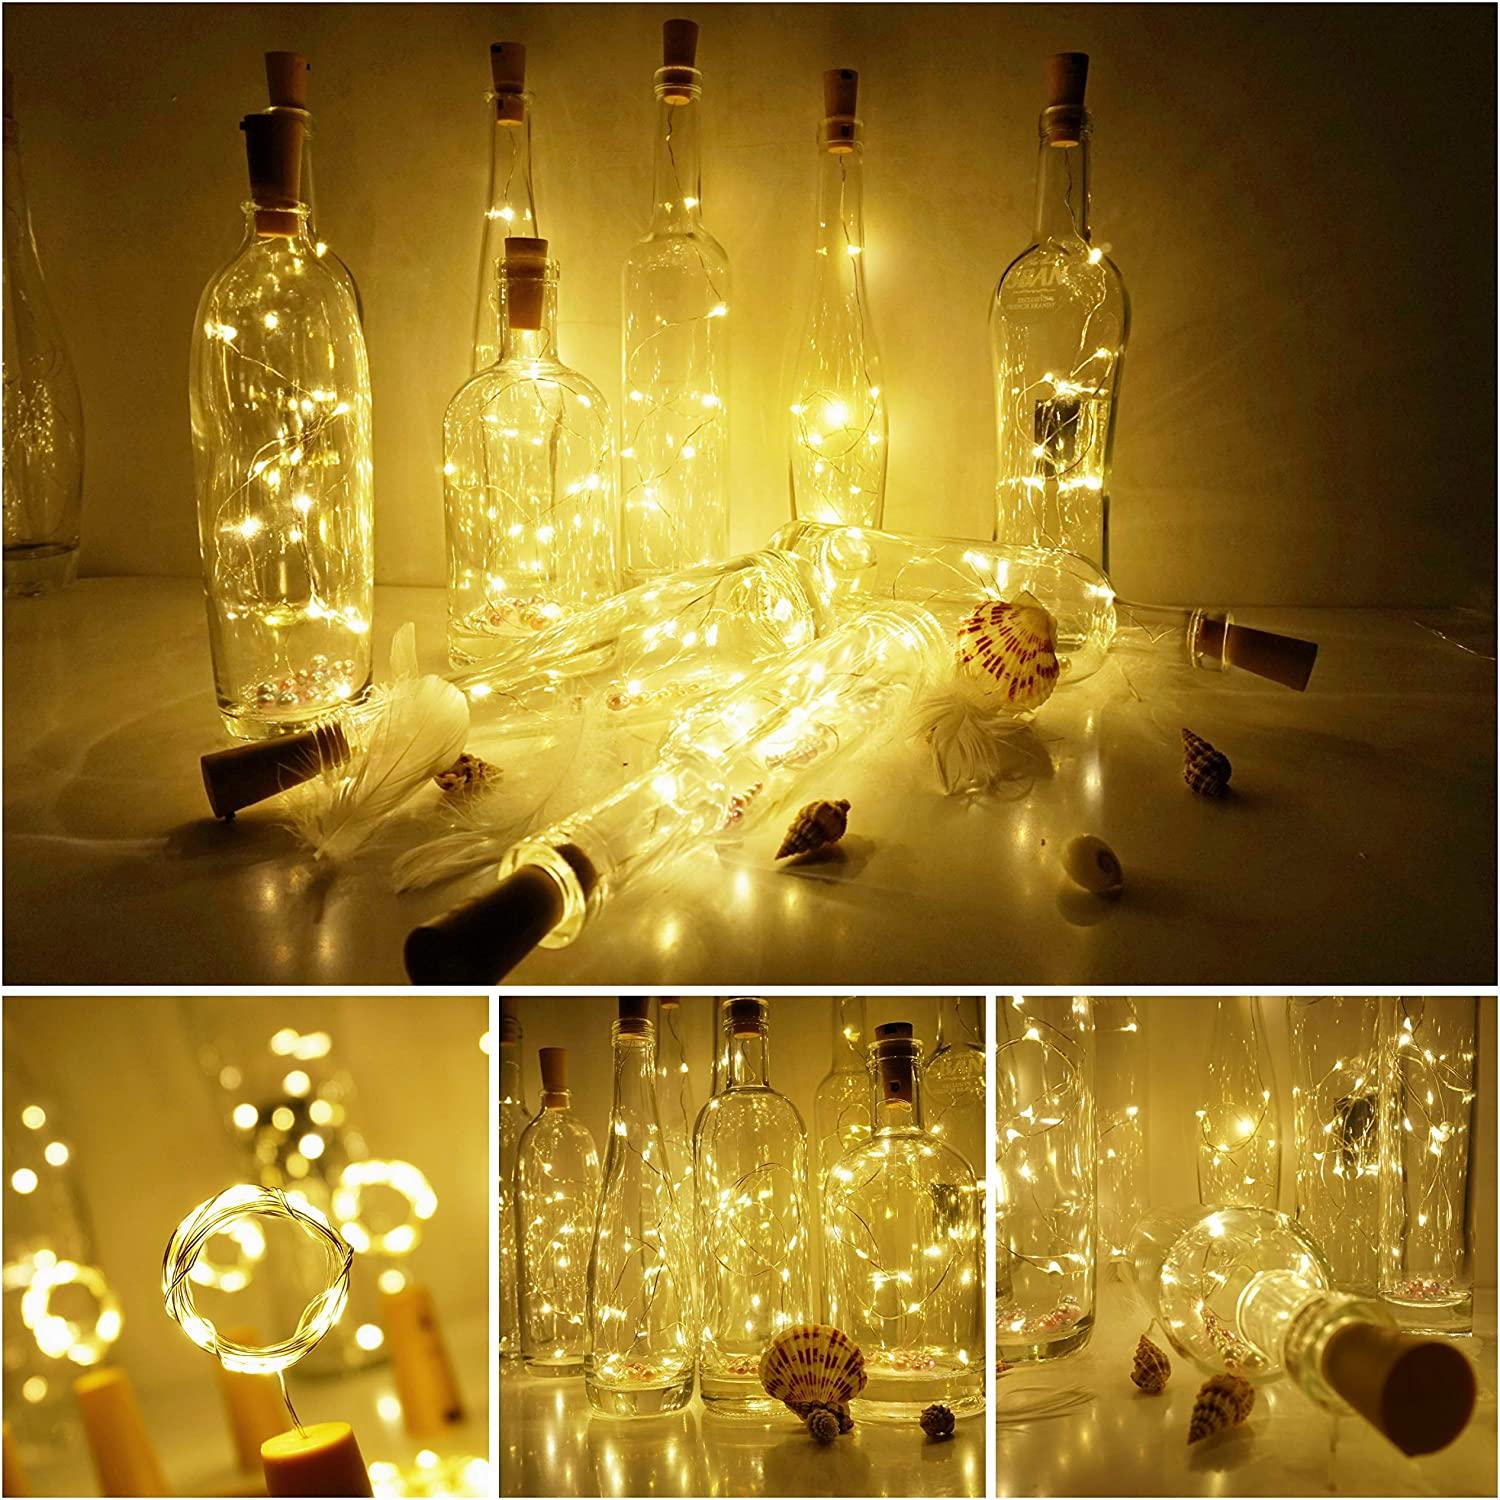 DIY String Light Ornaments for Tables,Parties - If you say i do